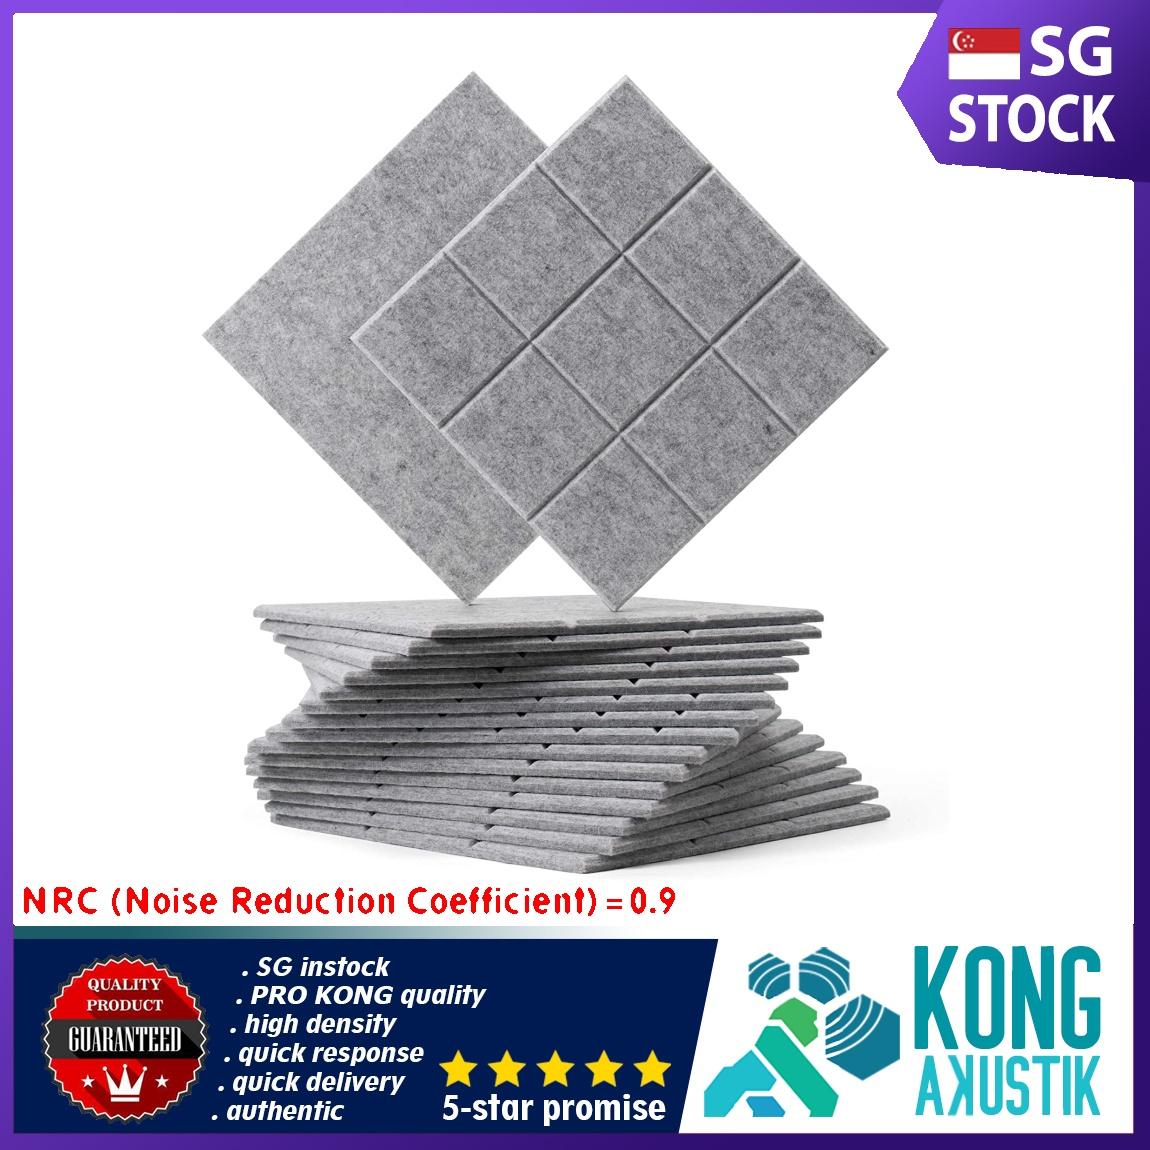 6 Pack Acoustic Panels Silver Gray Polyester Sound Proof Padding Beveled Edge Tiles for Echo Bass Insulation 12 X 12 X 0.4 